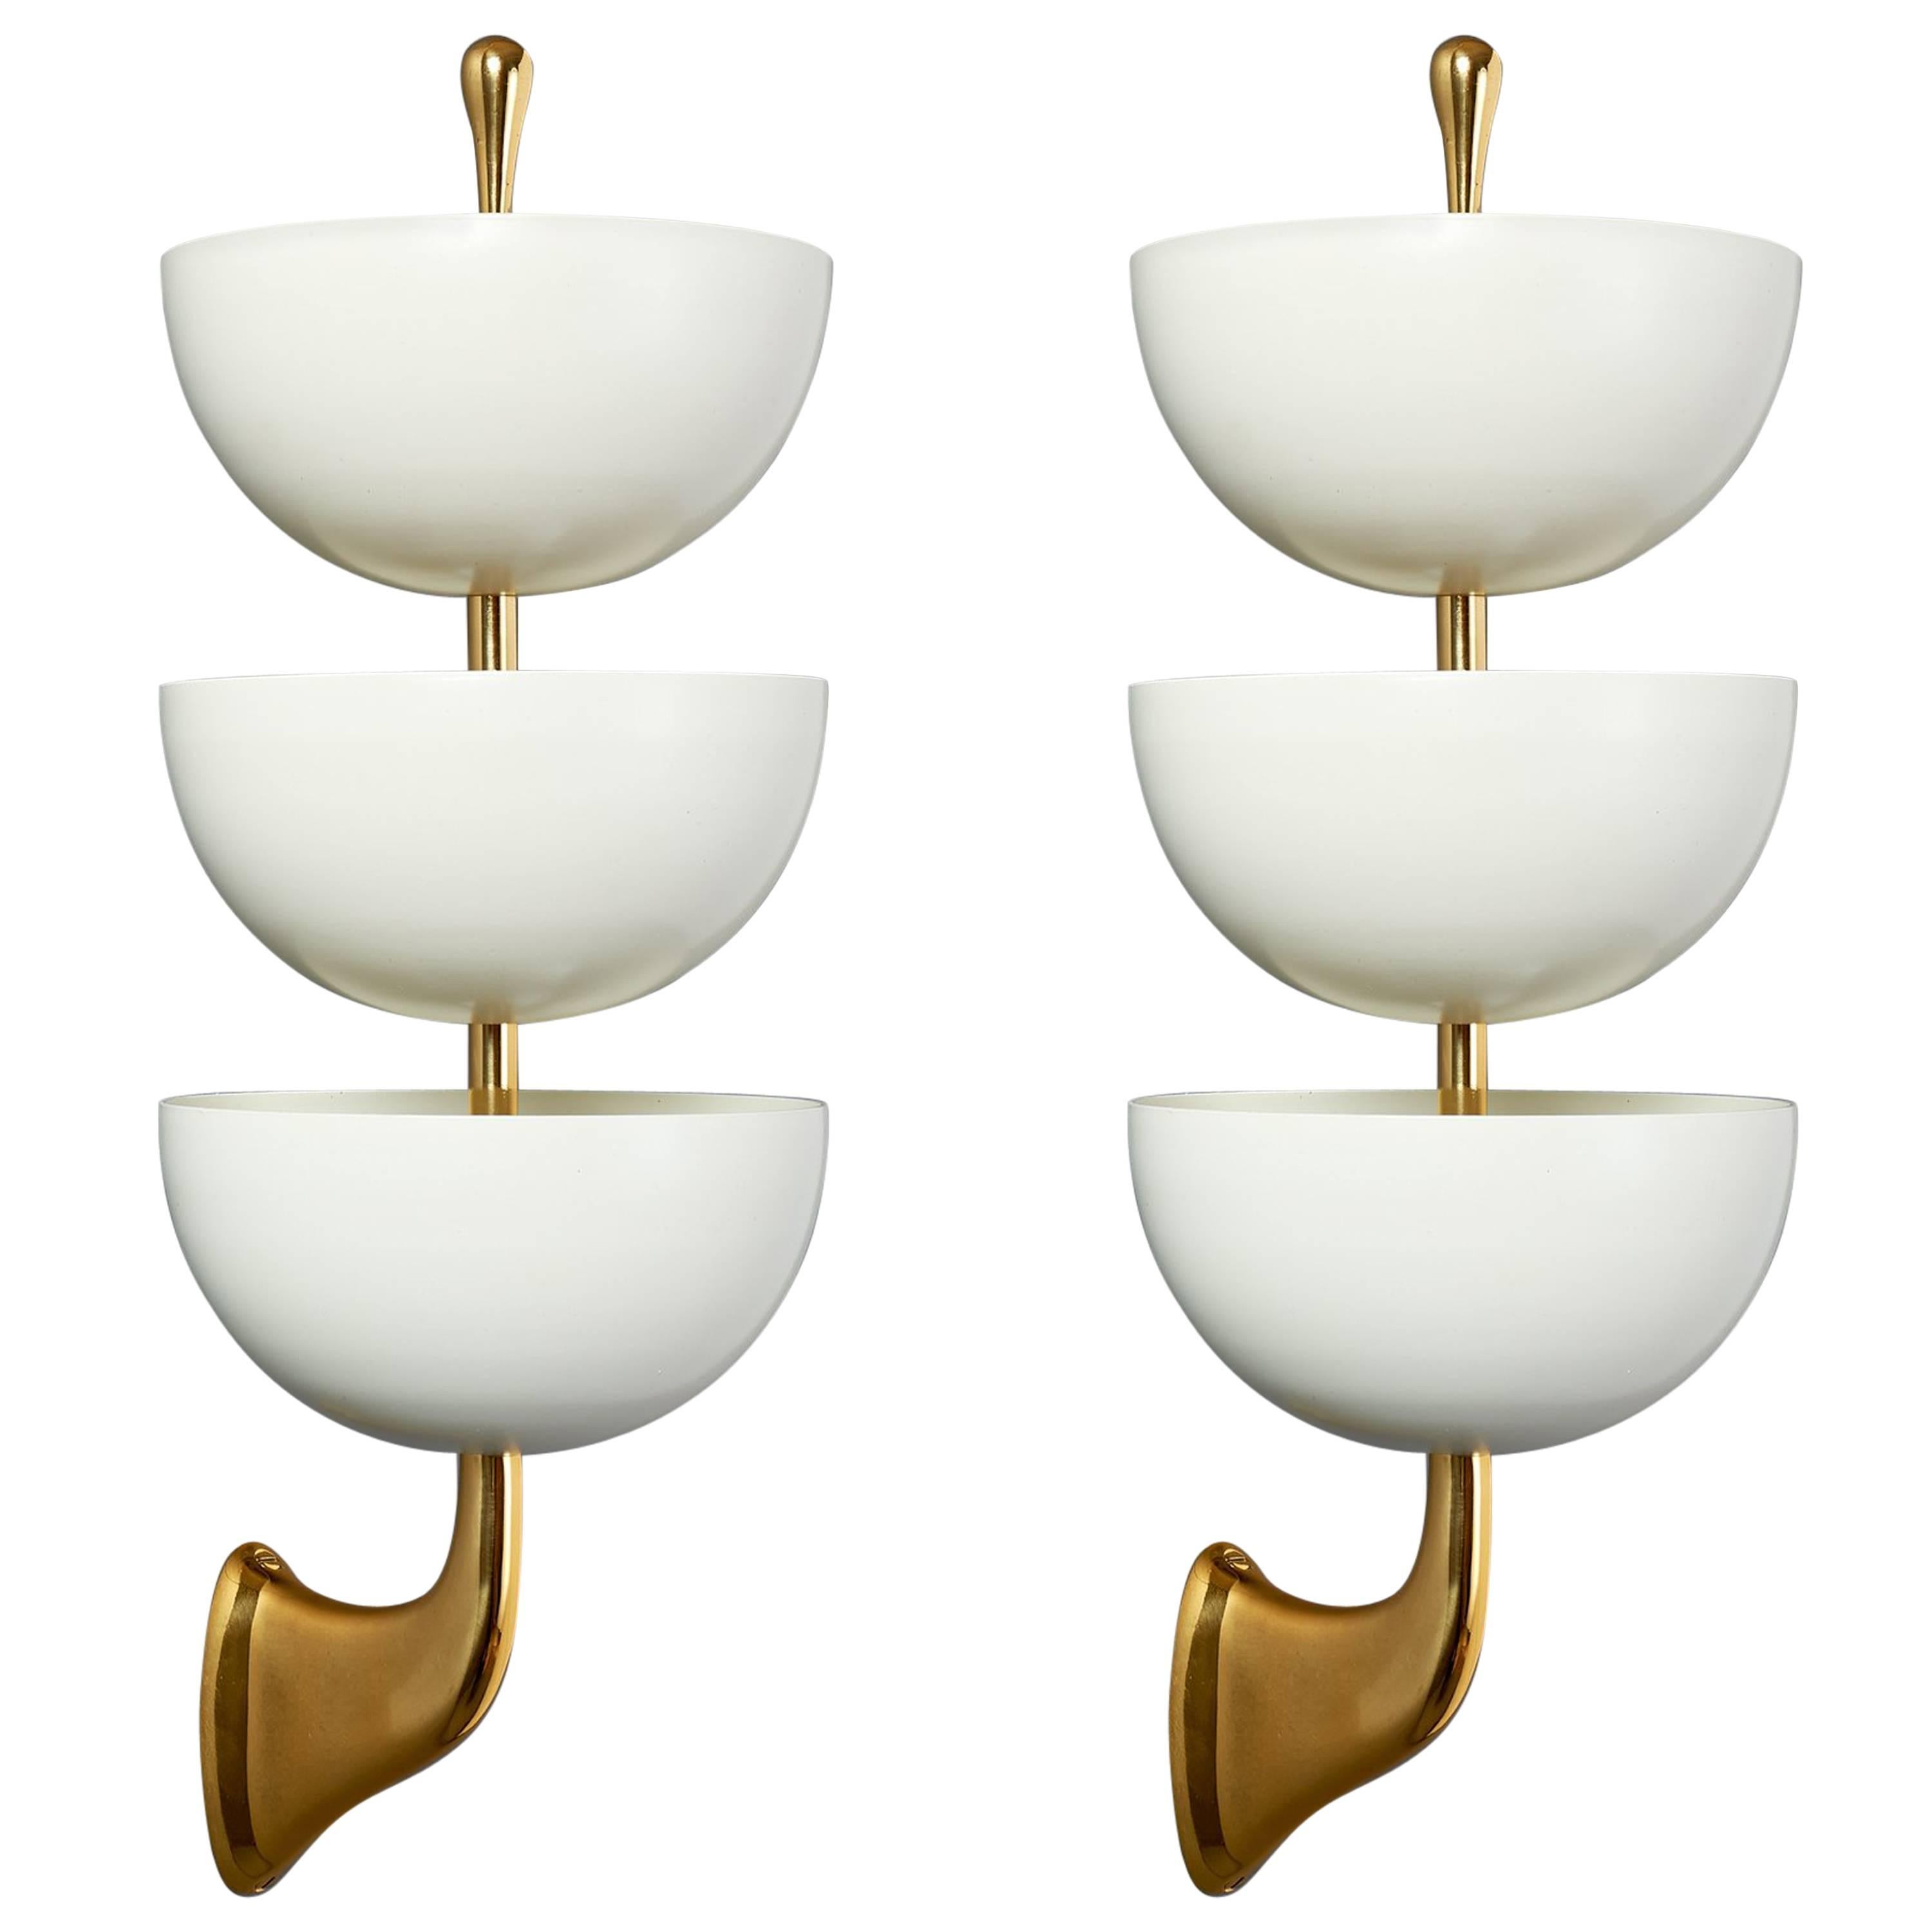 Pair of Three-Tiered Enameled Metal Sconces by Stilnovo, Italy, 1950s